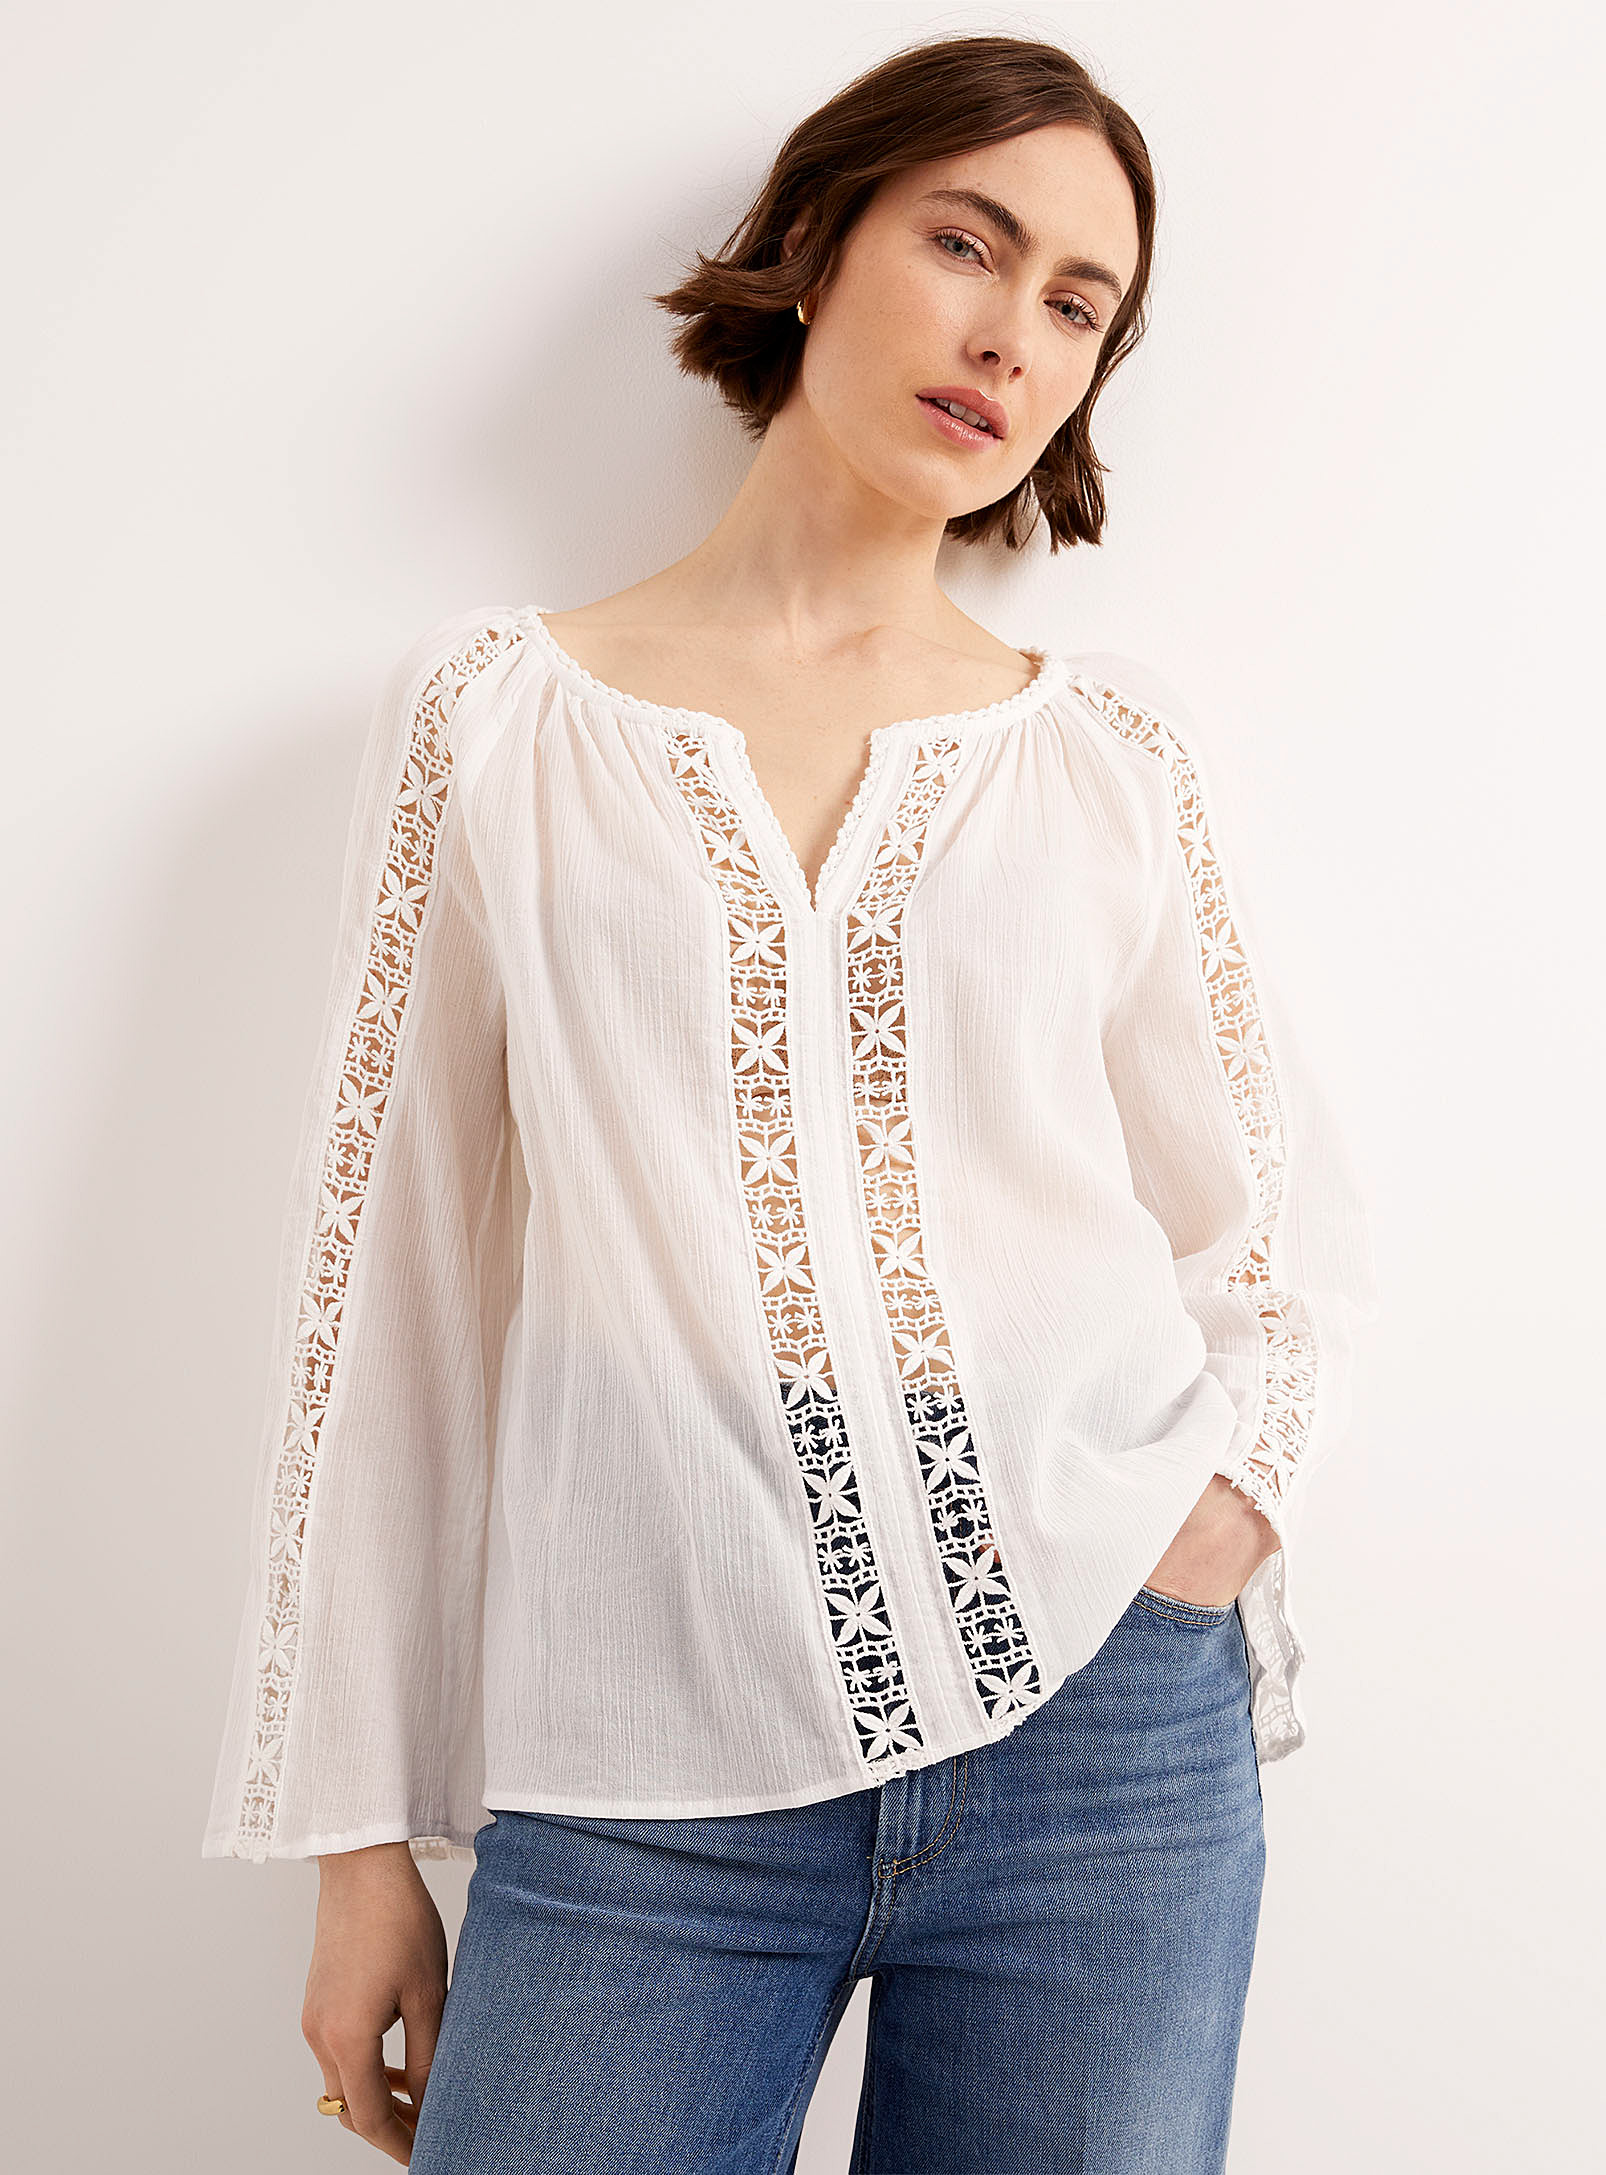 Contemporaine - Women's Crocheted ribbons sheer blouse